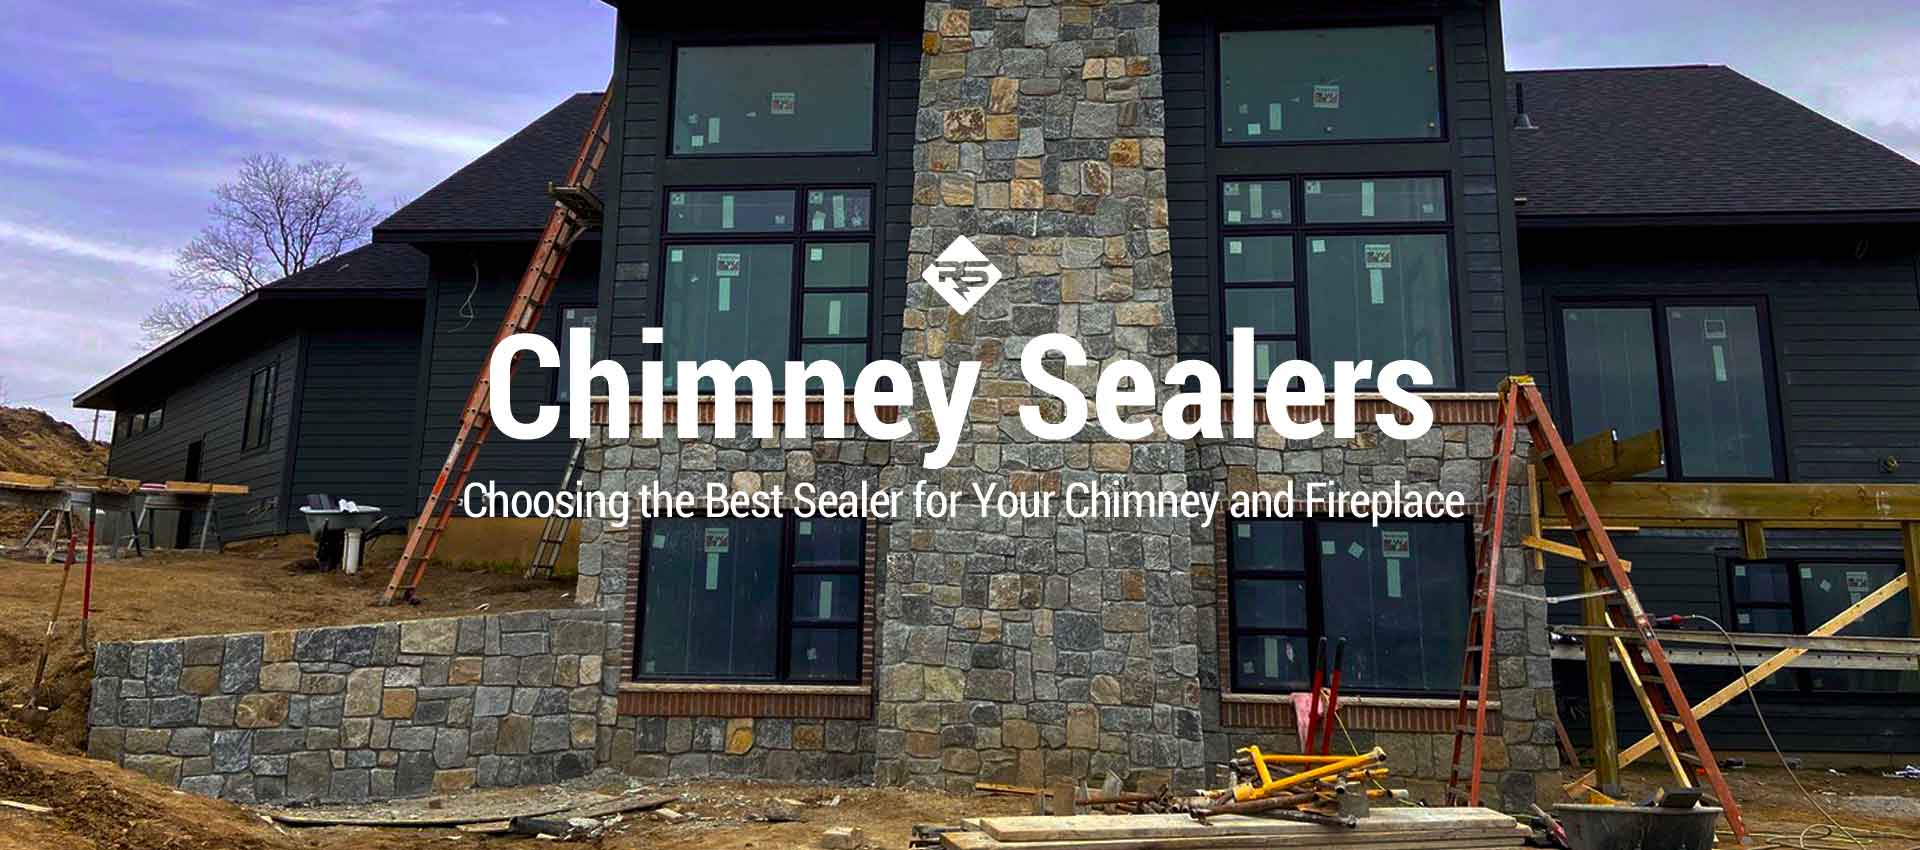 Chimney Sealers - Choosing the Best Sealer for Your Chimney and Fireplace